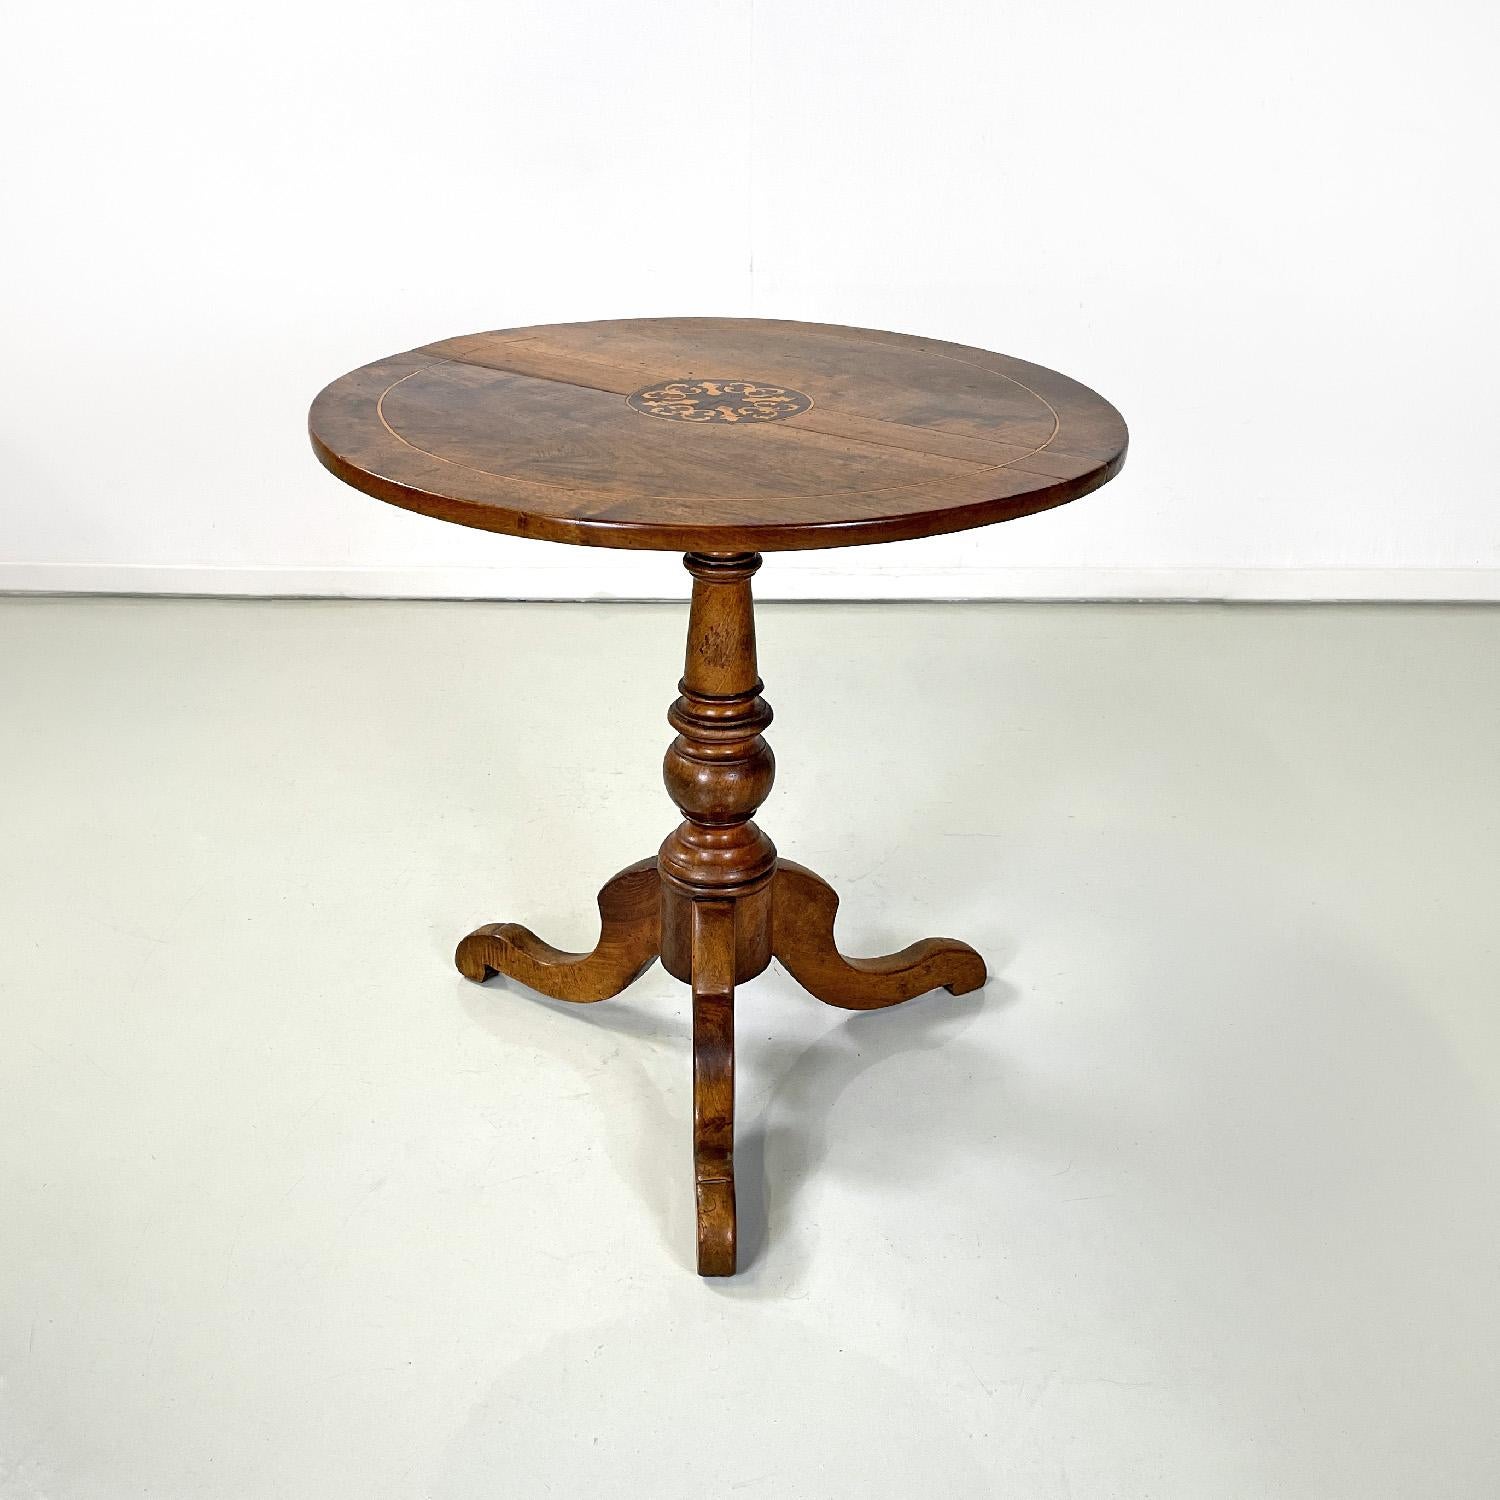 Italian antique wooden dining table with floral damask decoration, 1850s
Round wooden dining table. On the top it presents, in the central part, an inlaid round damask floral decoration, and near the edge a decorative line also inlaid. The finely